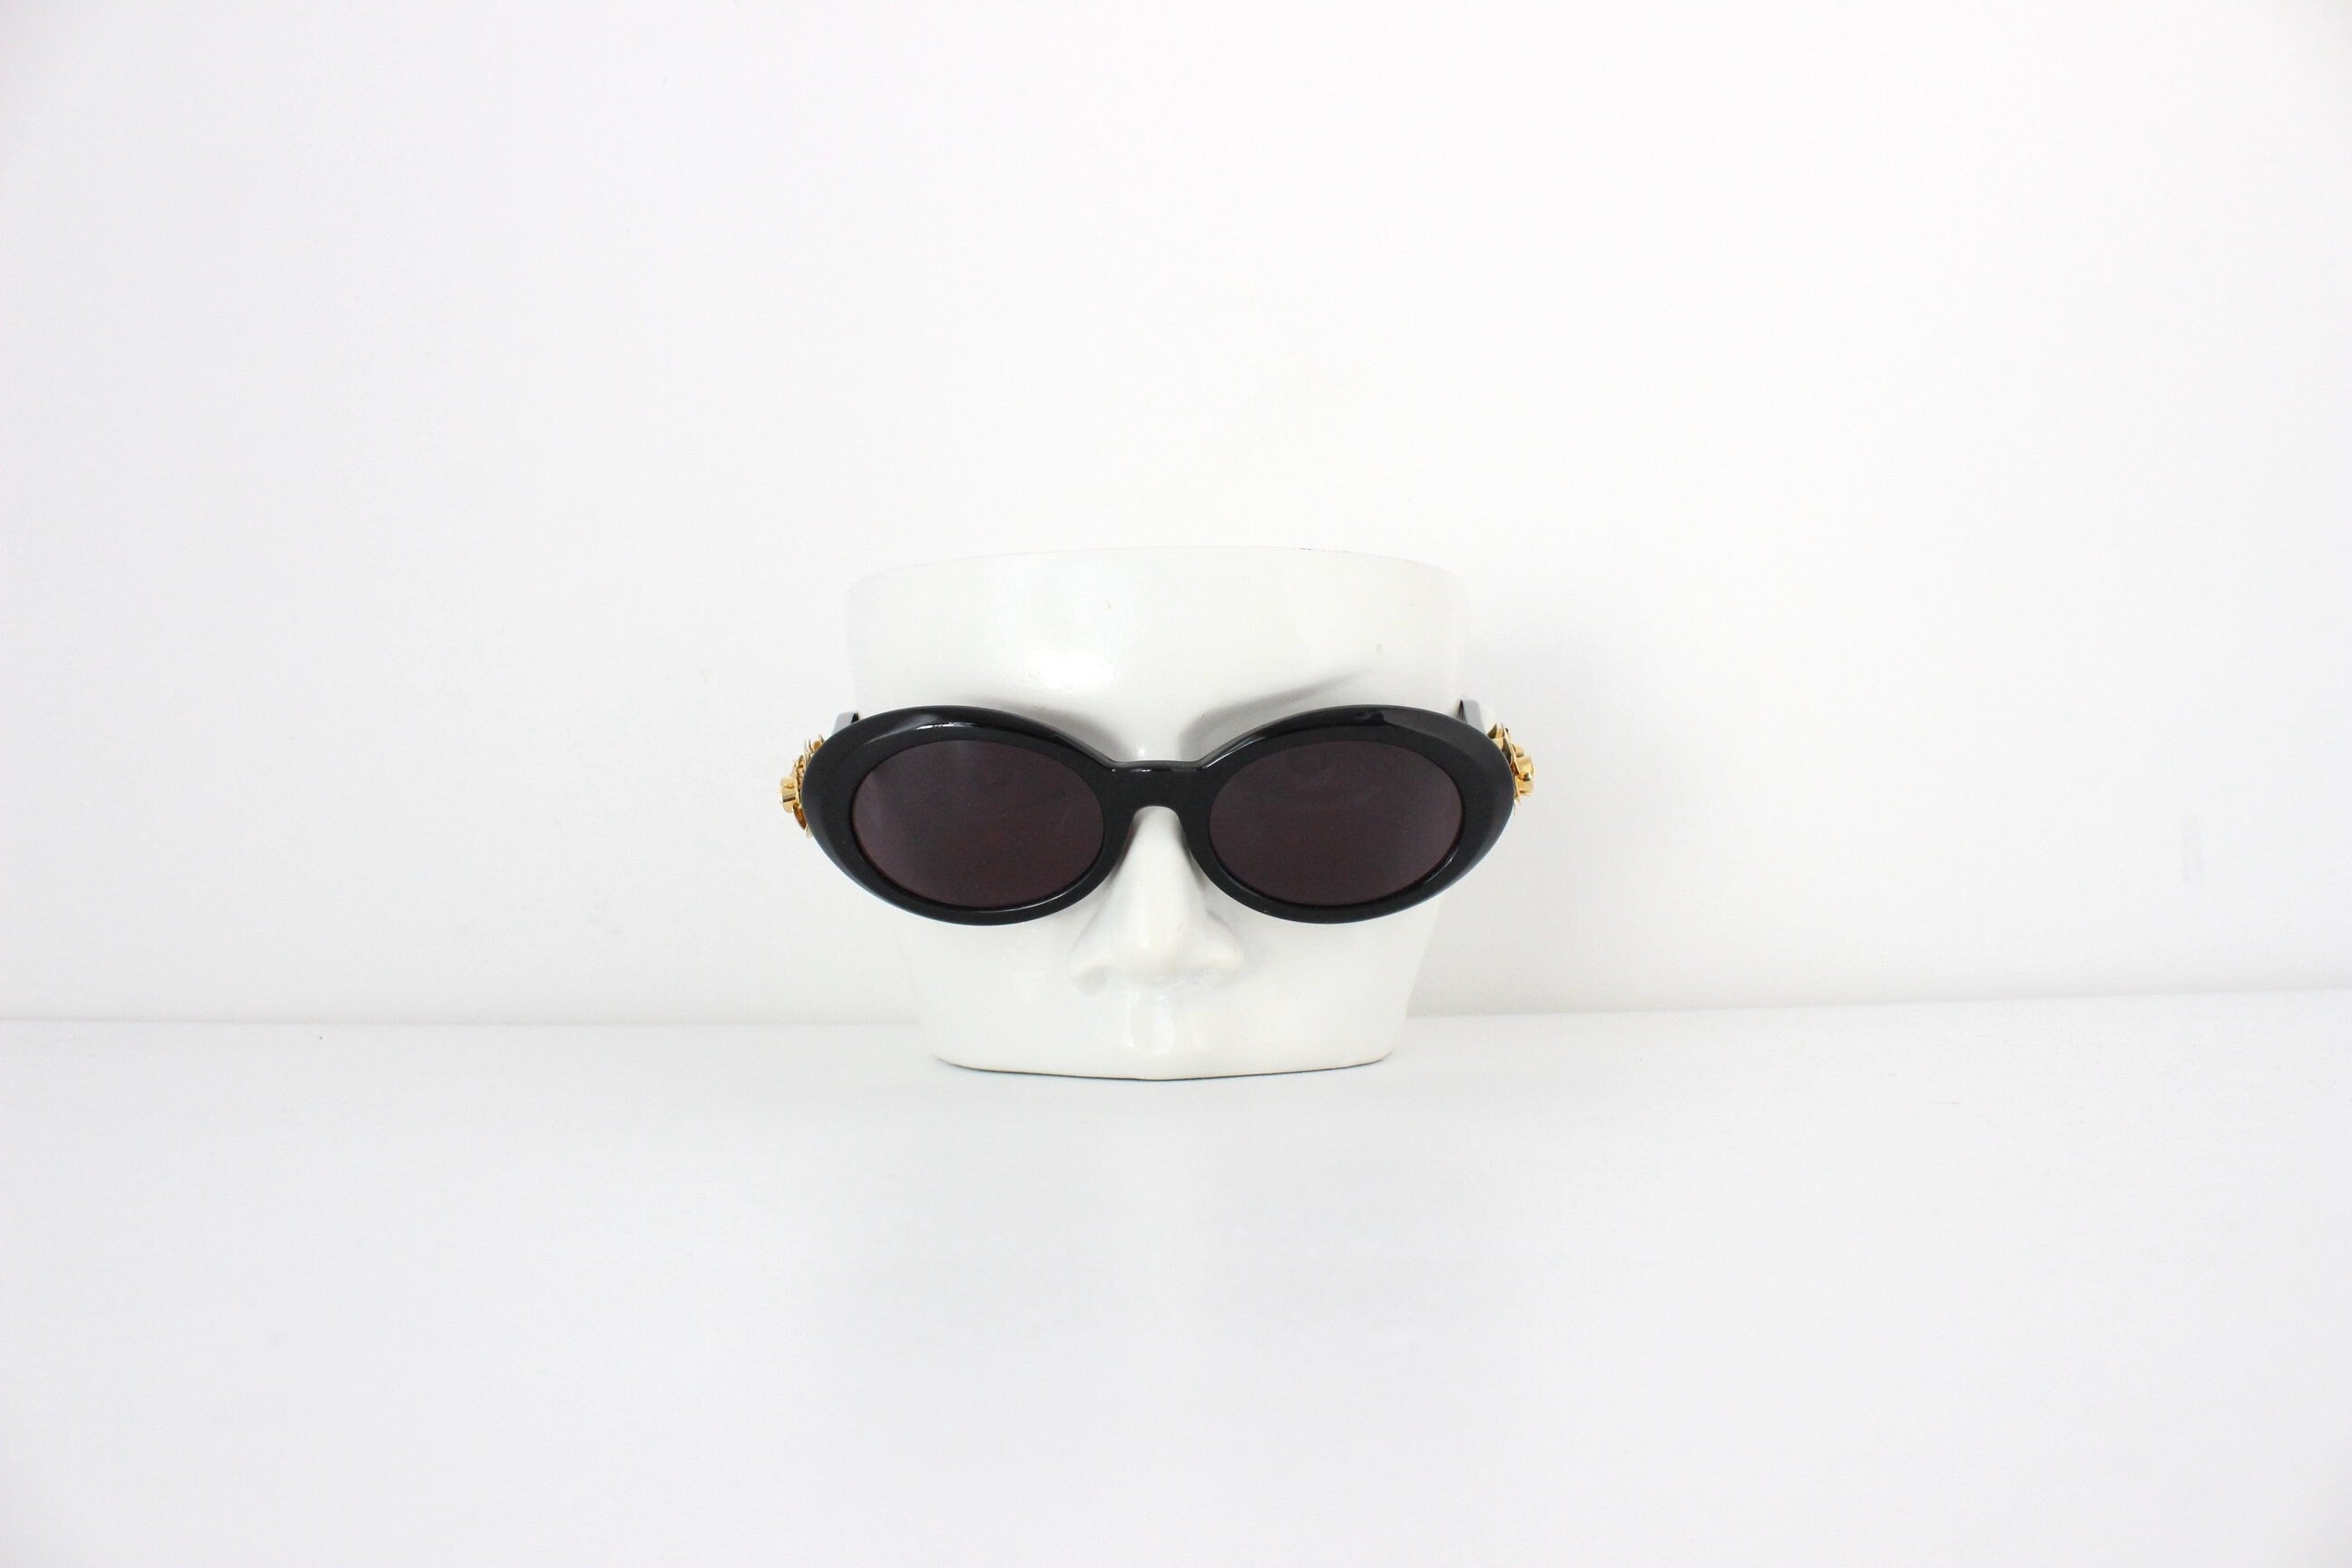 Collectible 80s GIANNI VERSACE Oval EyeSunglasses w/ Gold Roses